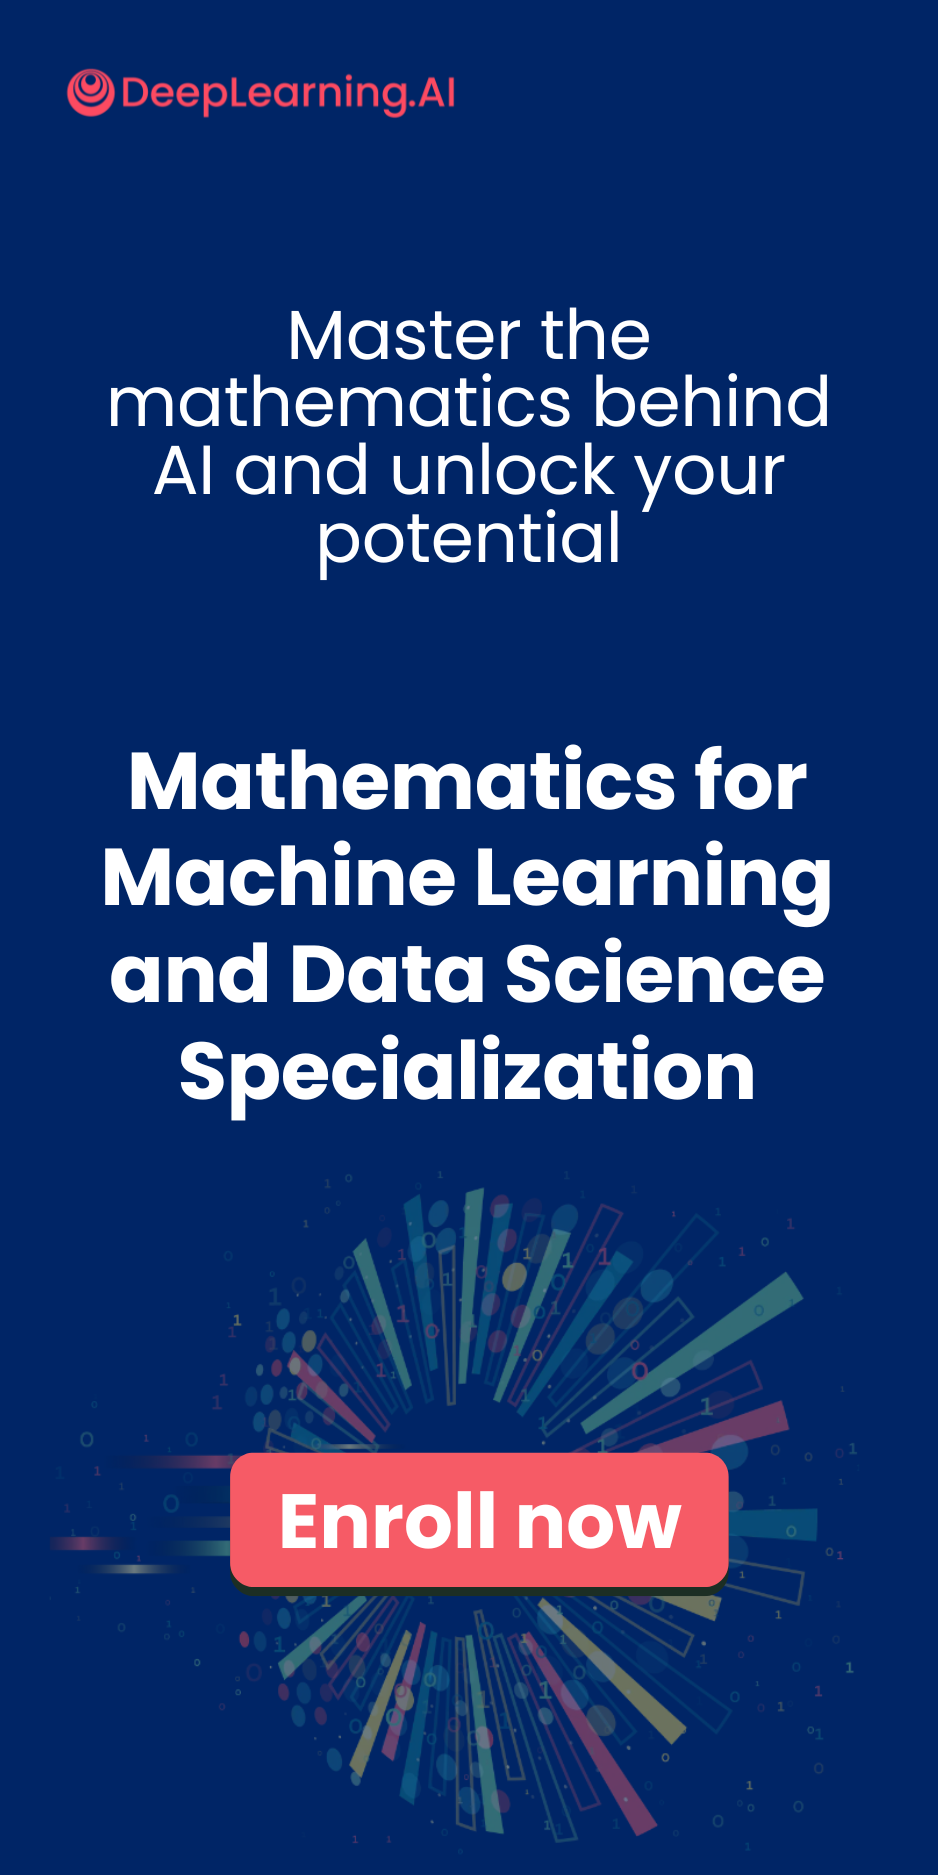 Mathematics for Machine learning and data science specialization. Enroll now to the course